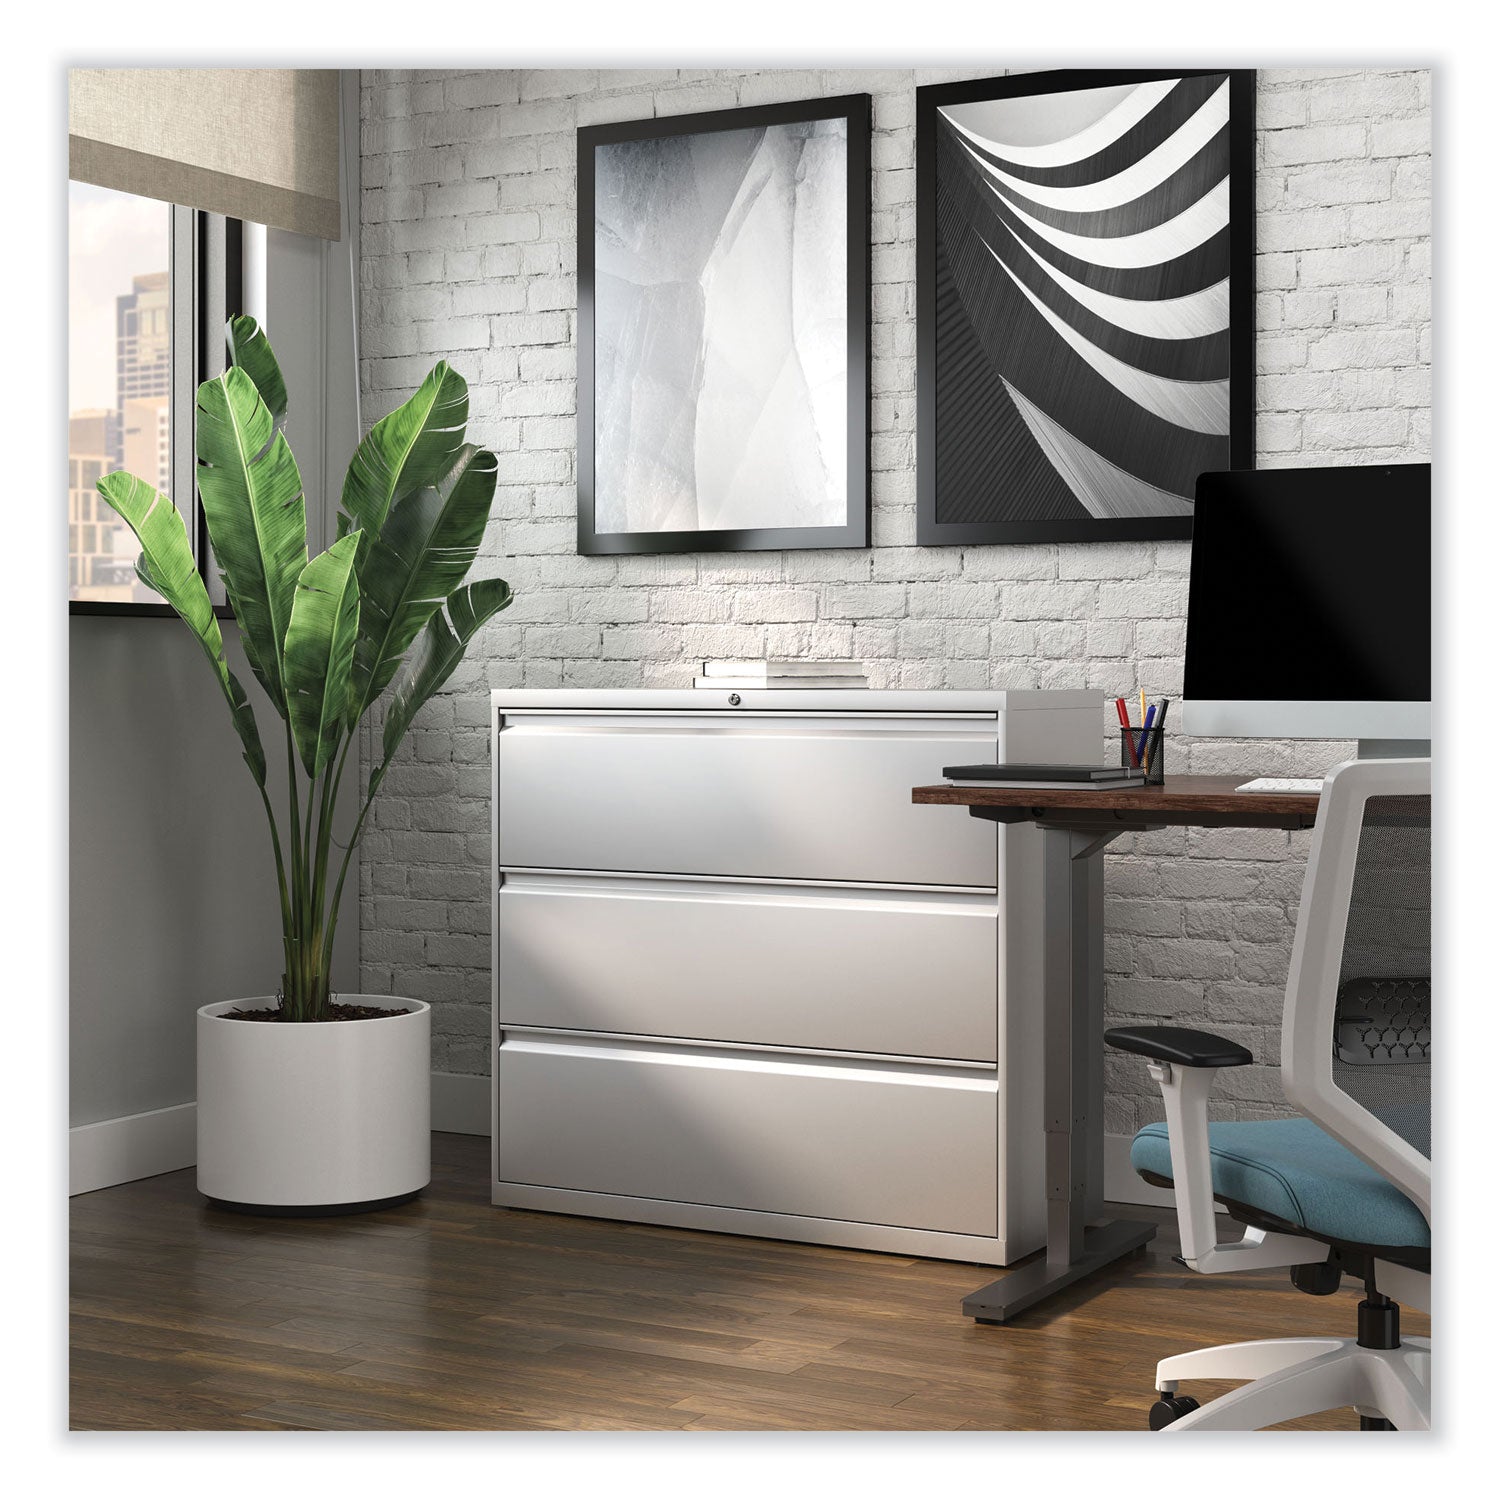 lateral-file-3-legal-letter-a4-a5-size-file-drawers-light-gray-42-x-1863-x-4025_alehlf4241lg - 7